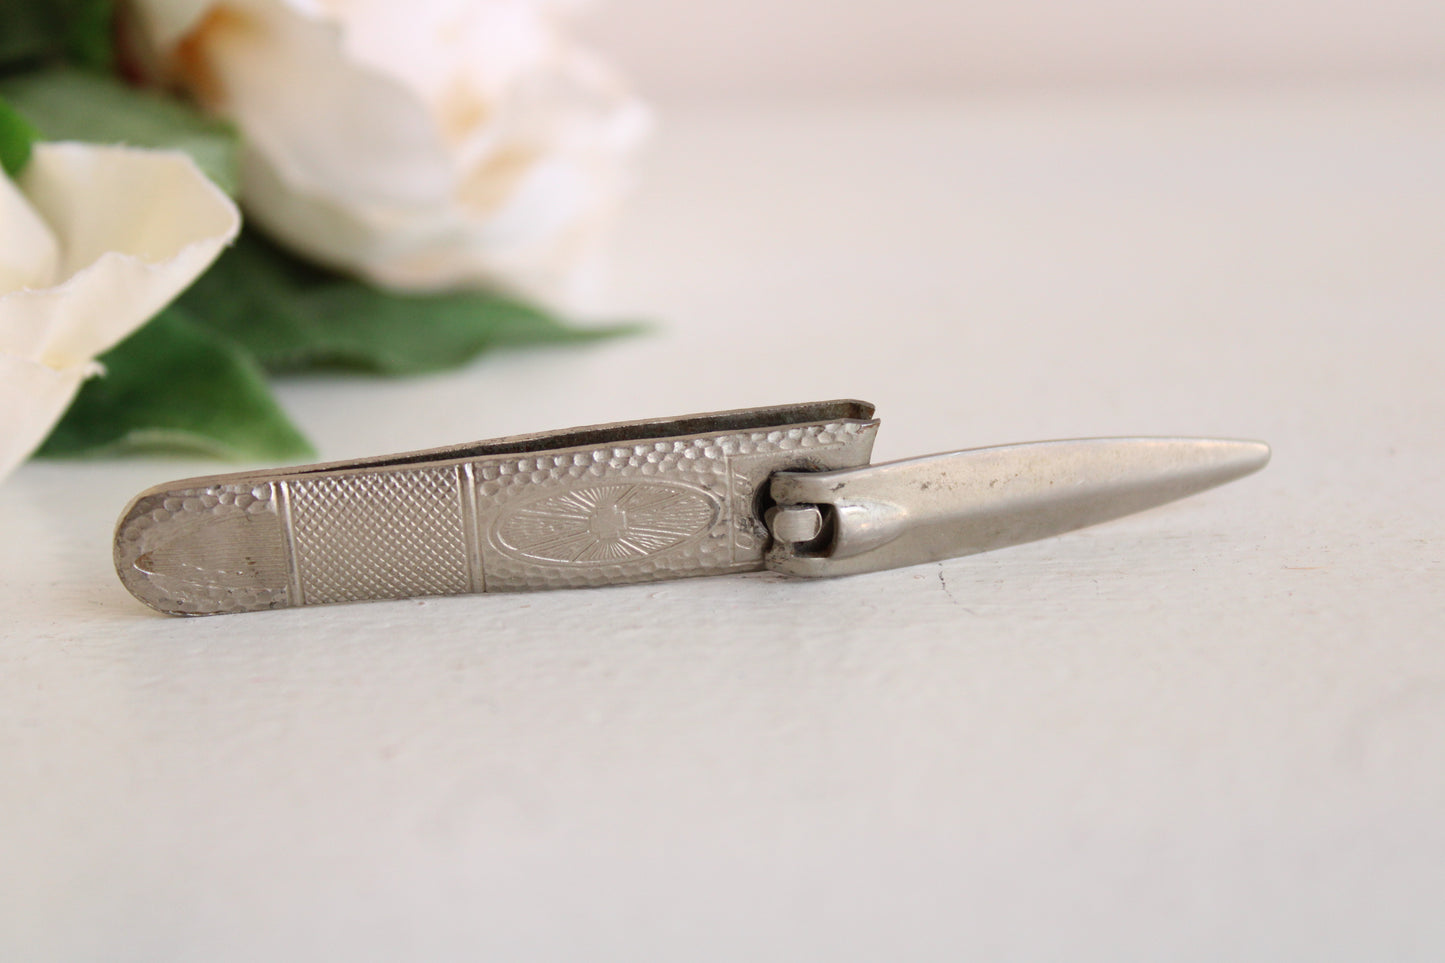 Vintage 1930s 1940s 10 50 Nail Clippers by Schnefel Bros